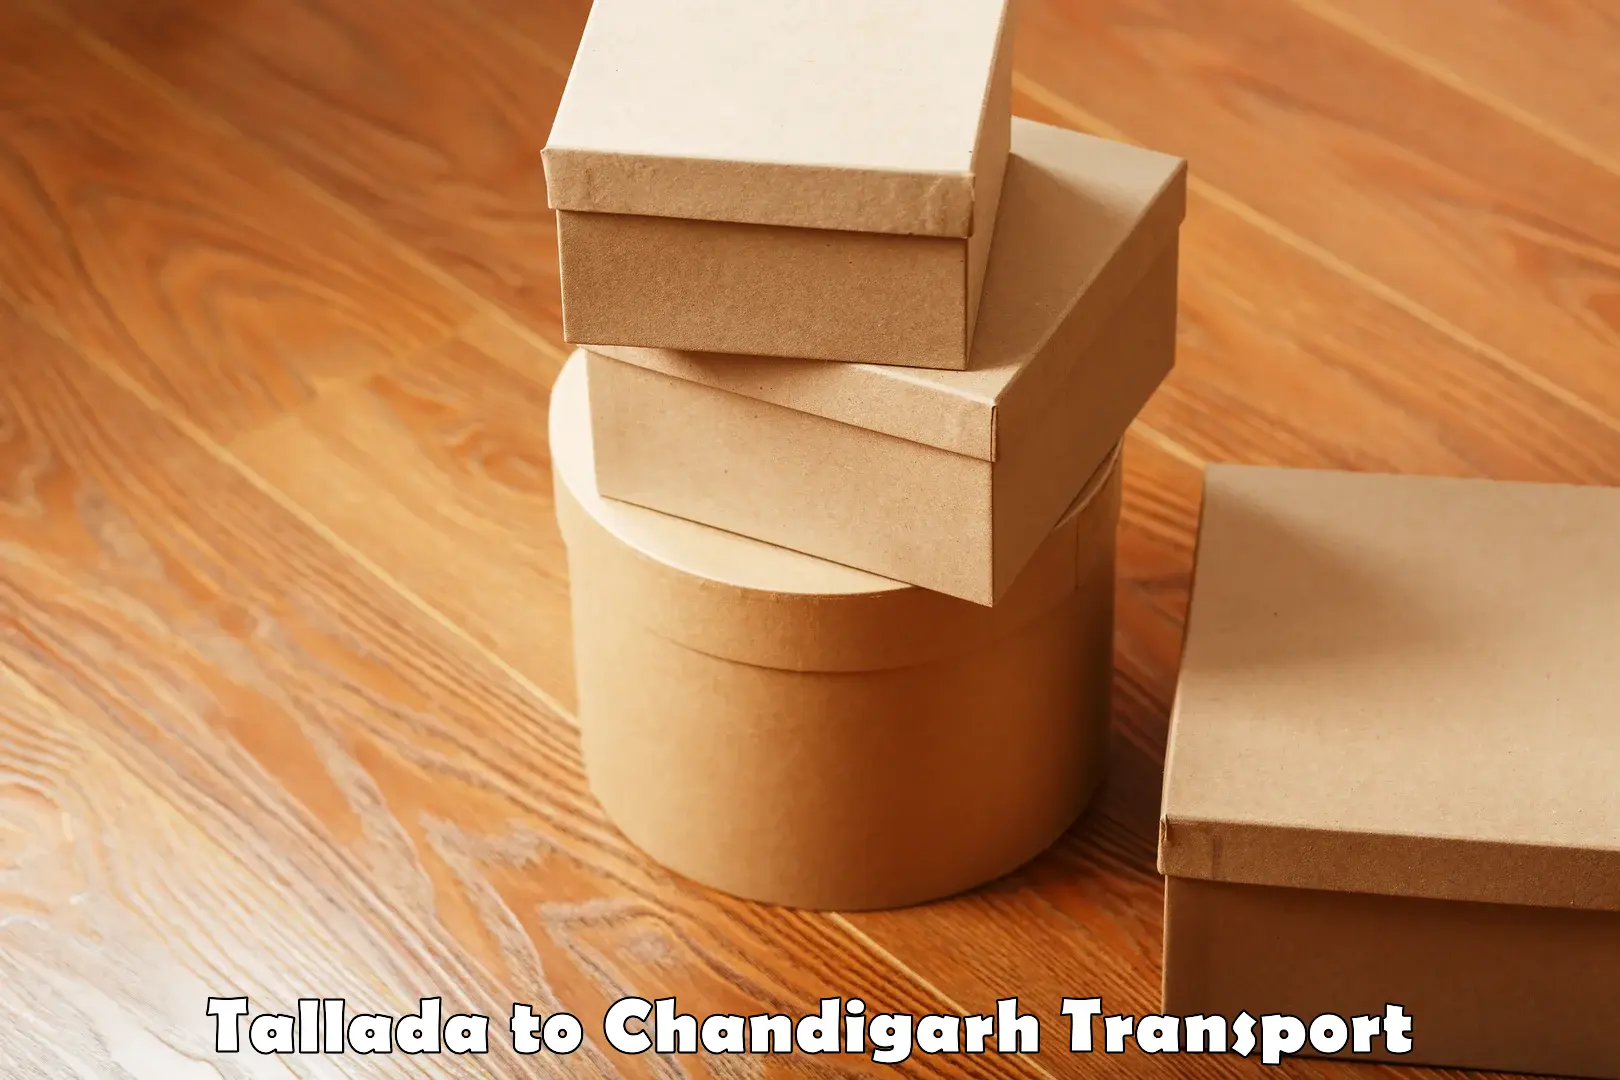 Daily parcel service transport Tallada to Chandigarh